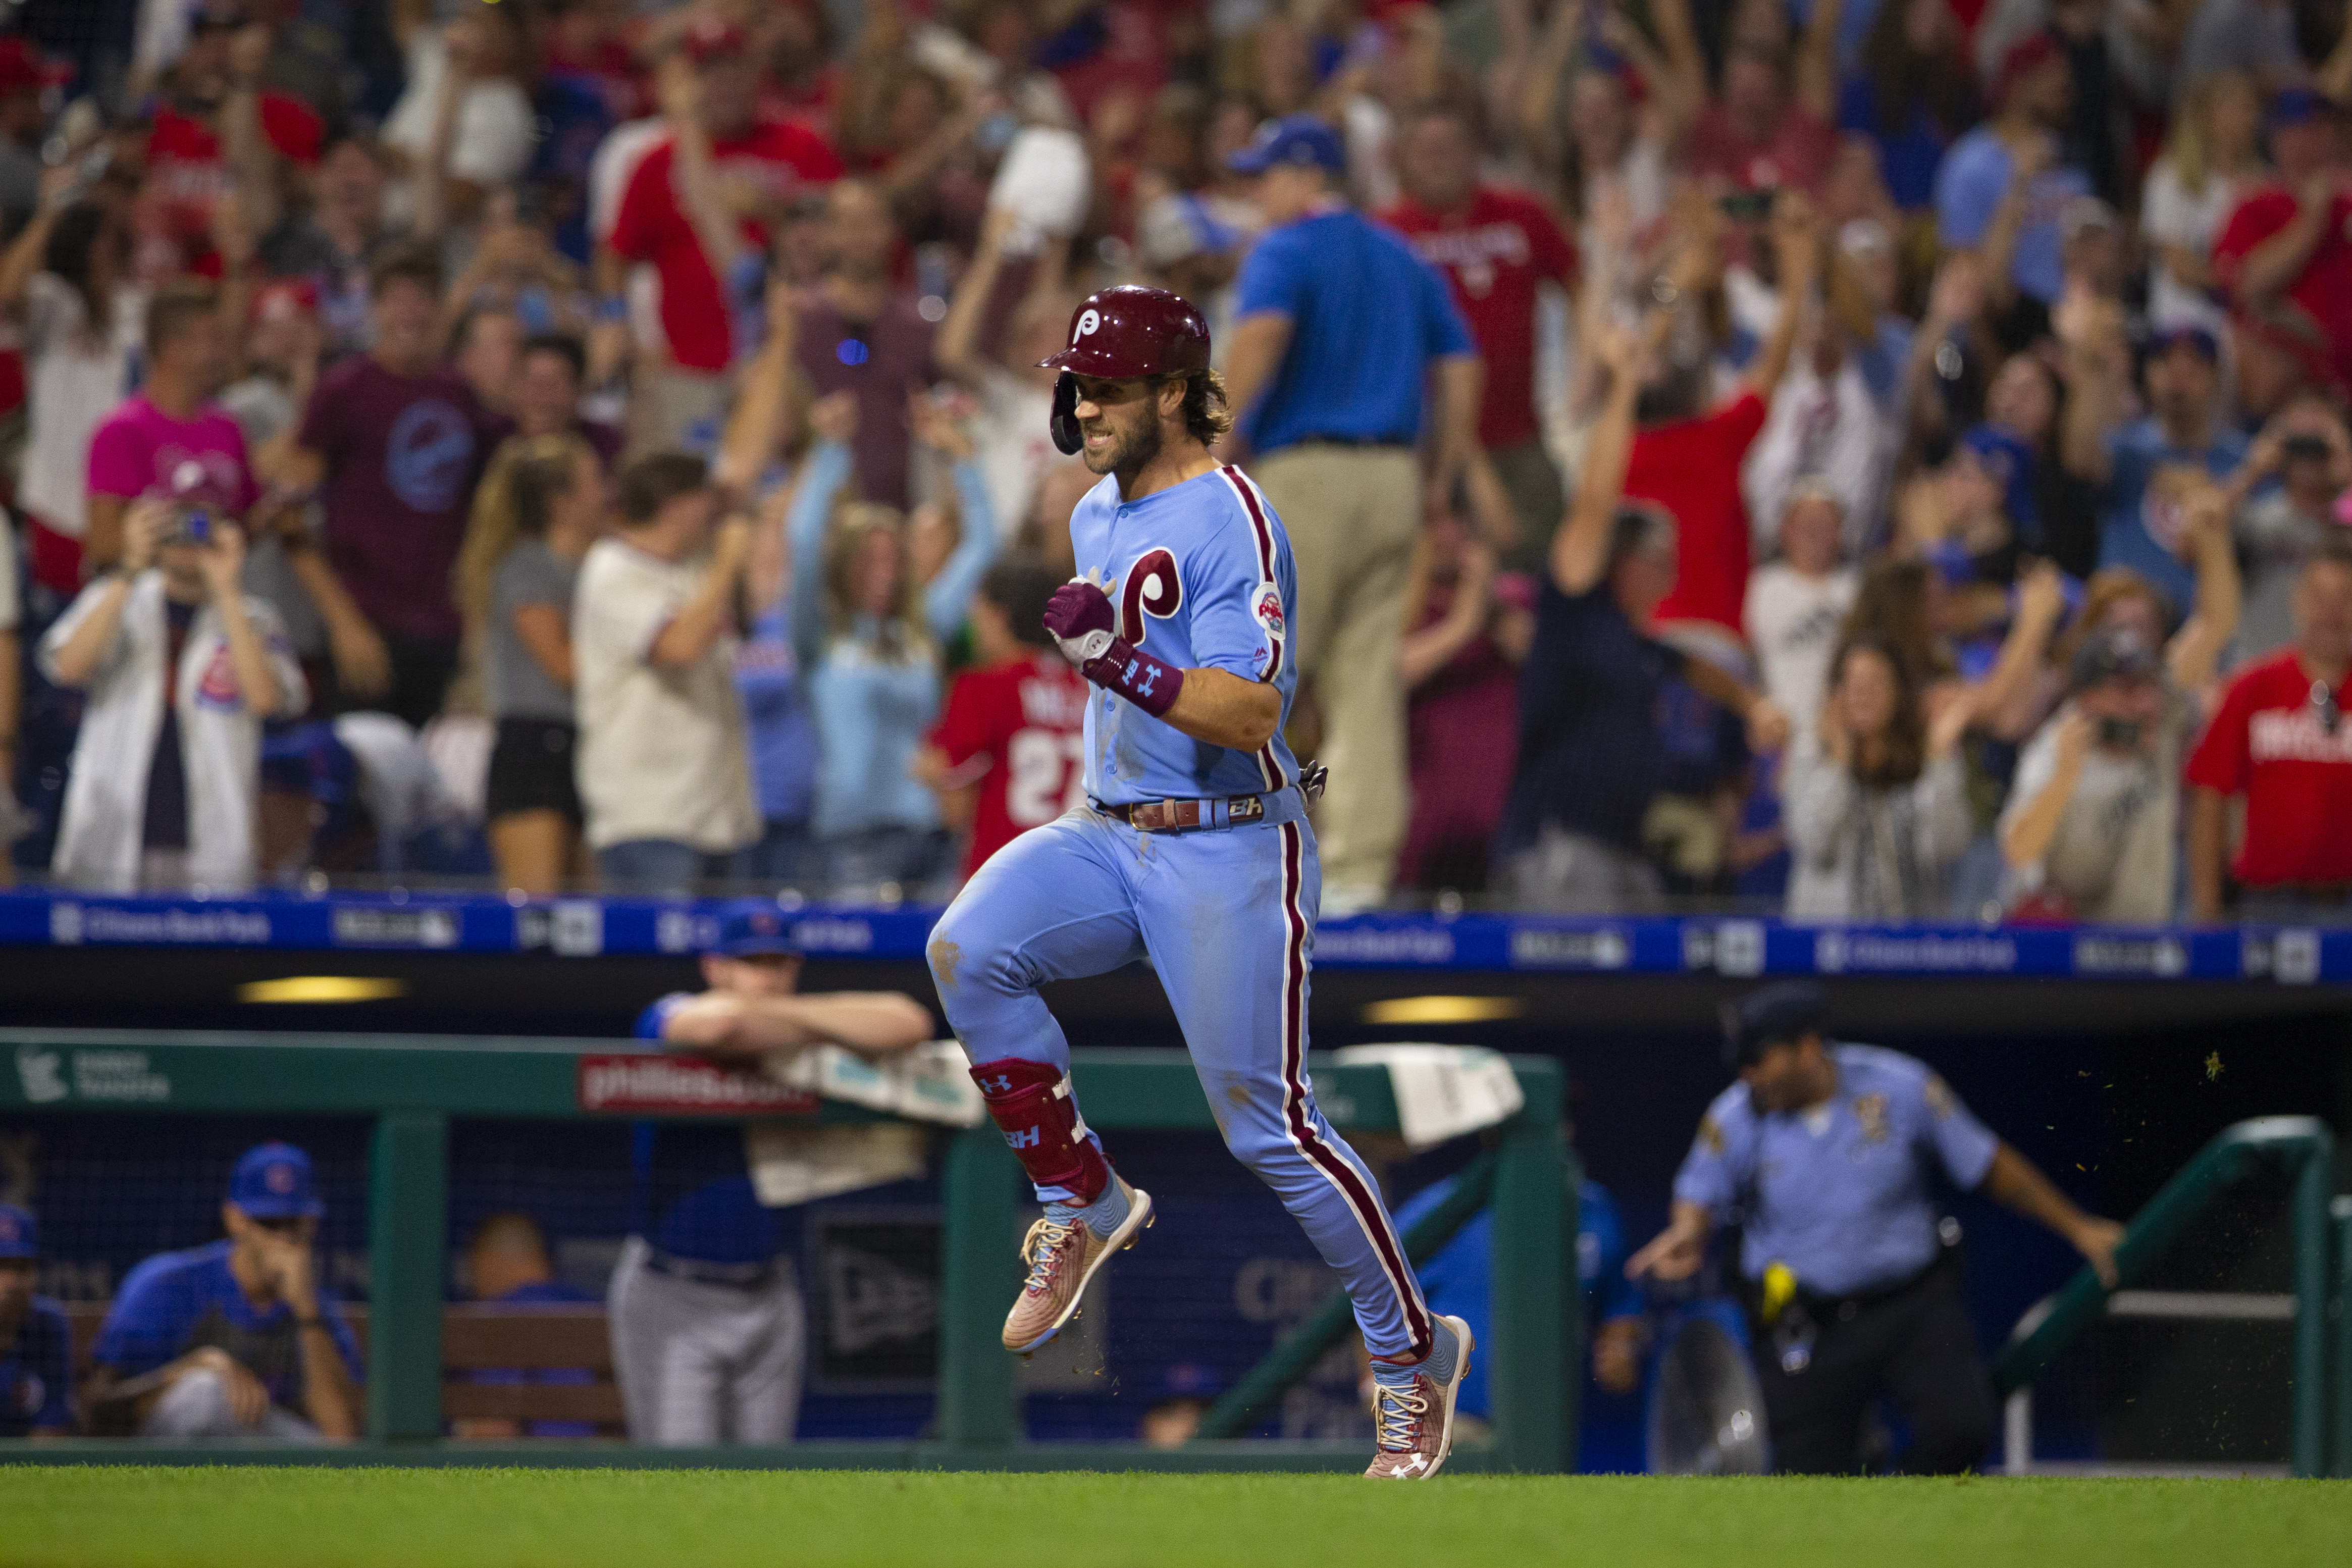 Phillies Bryce Harper to Begin Rehab Assignment with IronPigs This Week   WDIY Local News